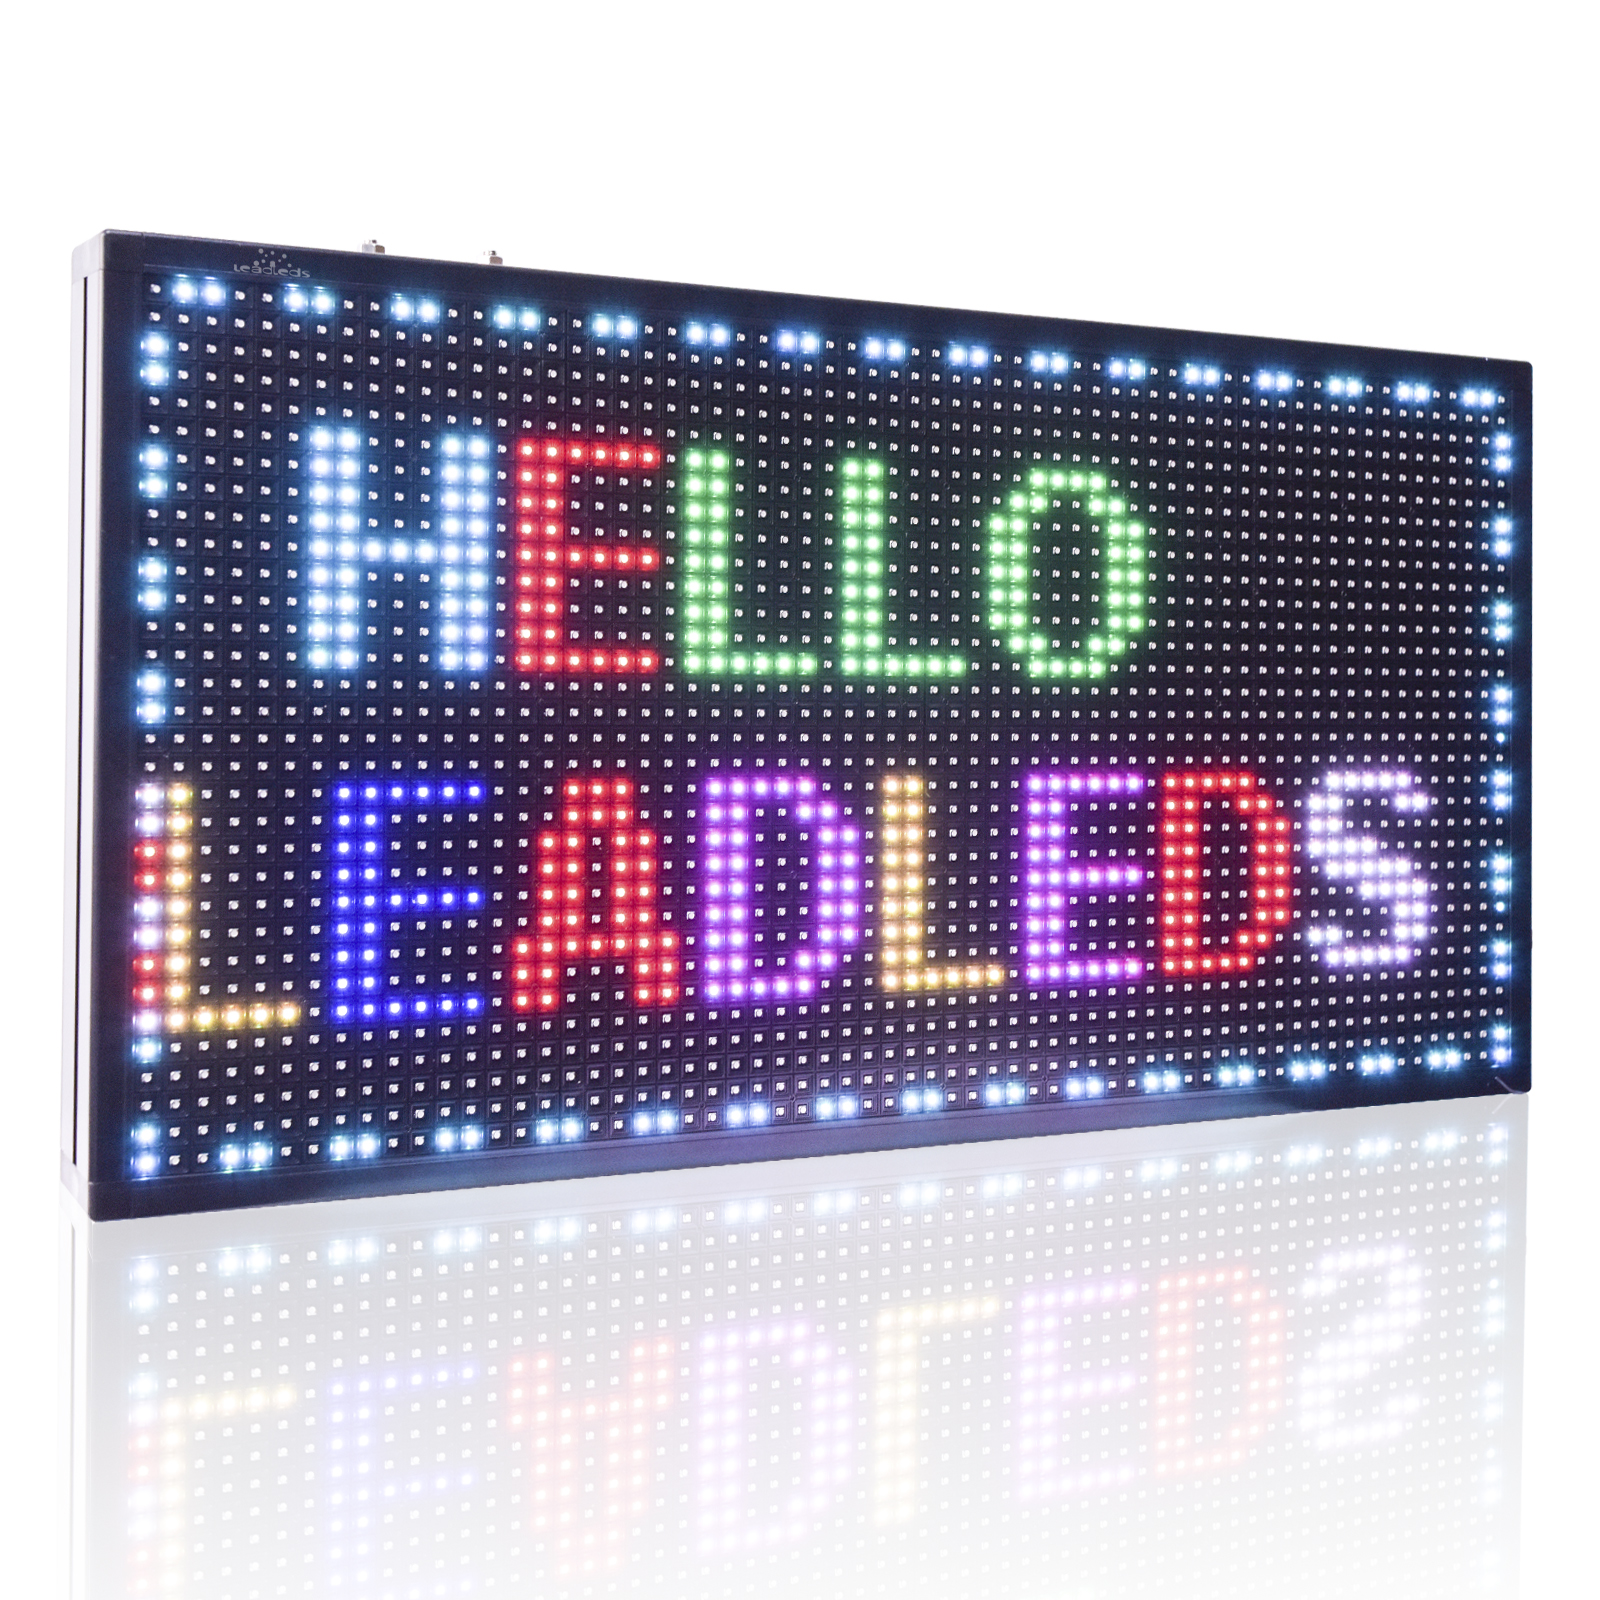 Multicolor Led Display Screen Scrolling Message Board App Programmable  Wireless Smart Led Sign Advertising Lighting 1-4 lines Lazada PH